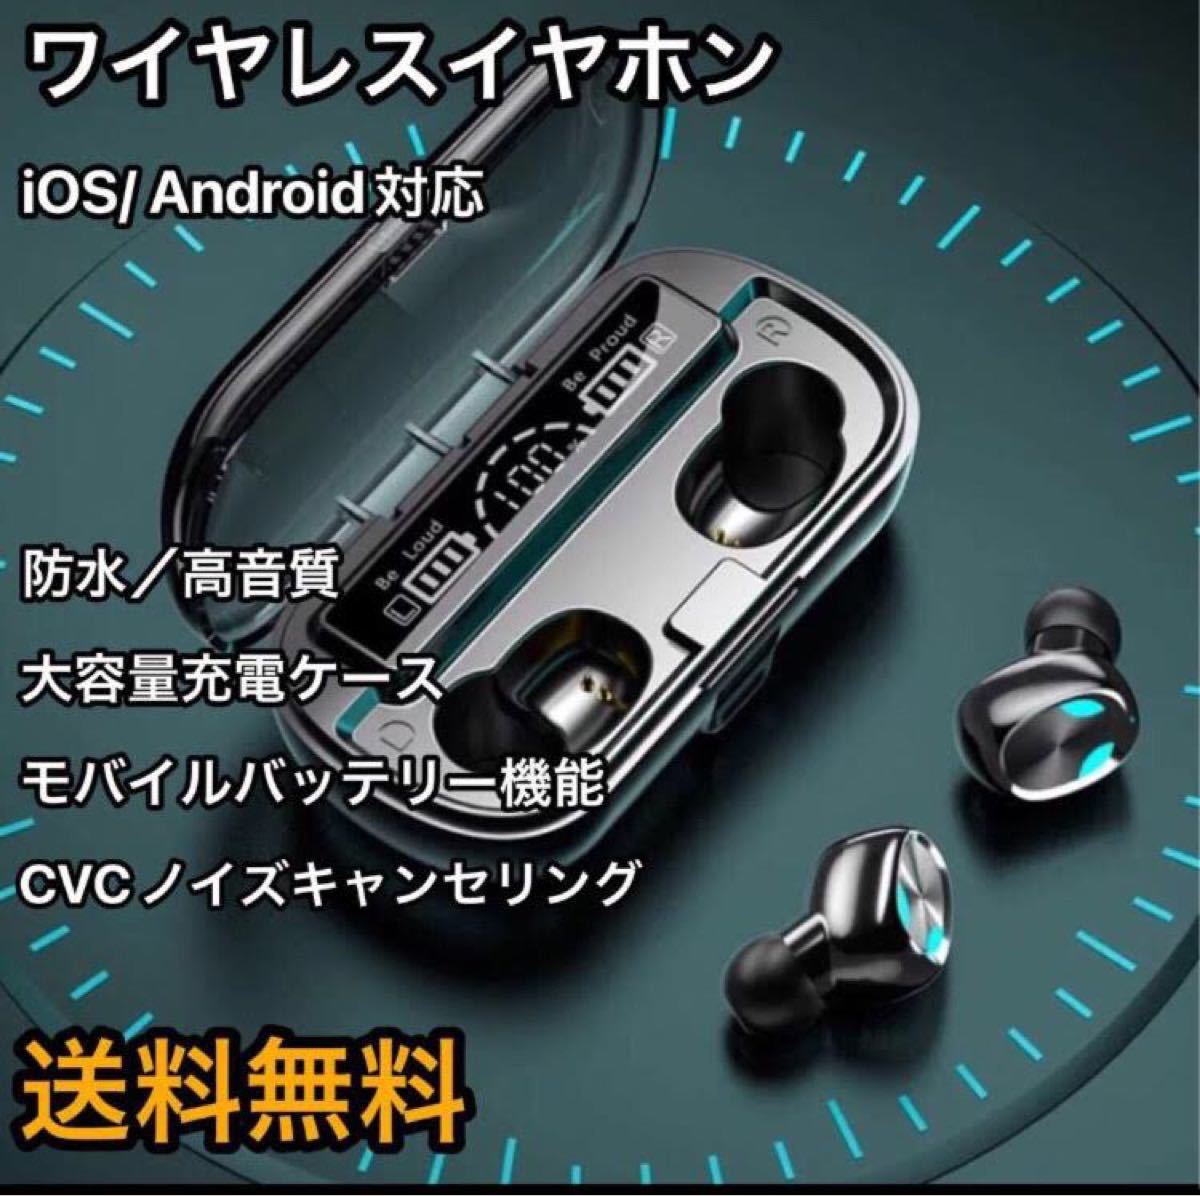 iPhone Android Bluetoothワイヤレスイヤホン「高品質」ワイヤレスイヤホン ブルートゥース　イヤフォン